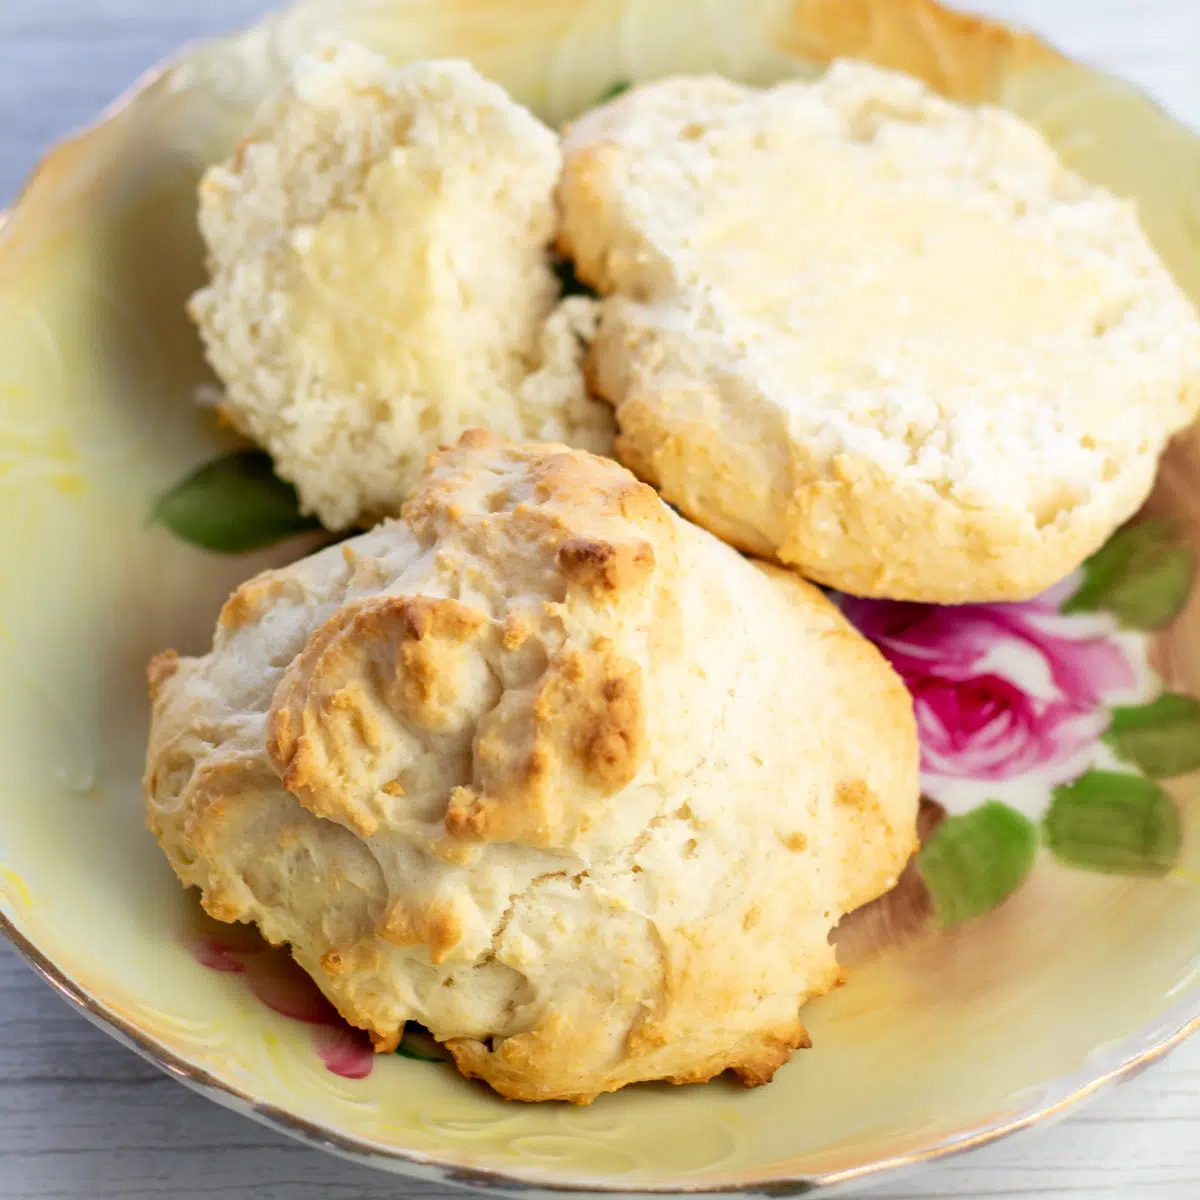 Best 3 ingredient drop biscuits on vintage floral plate with one cut and buttered in background.